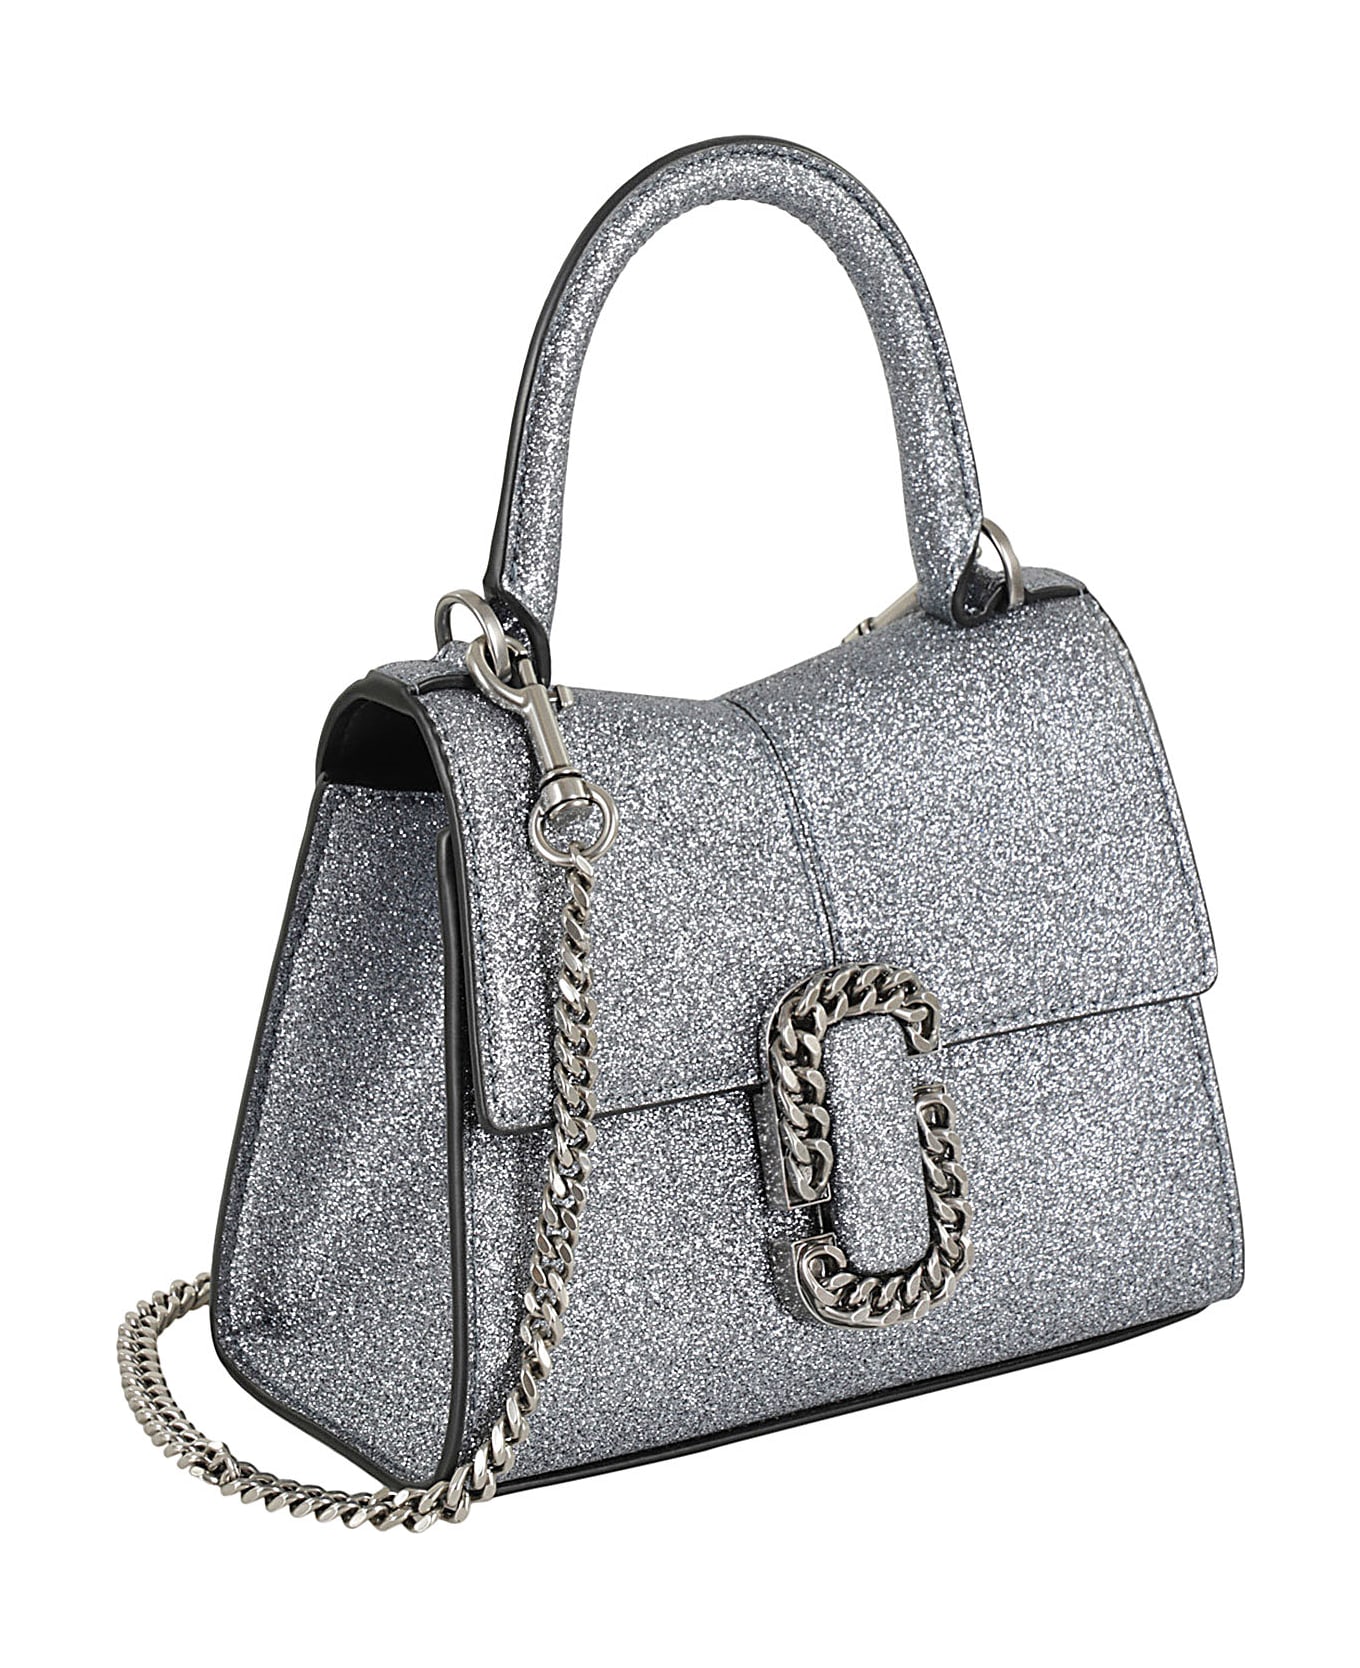 Marc Jacobs The Mini Top Handle - Silver